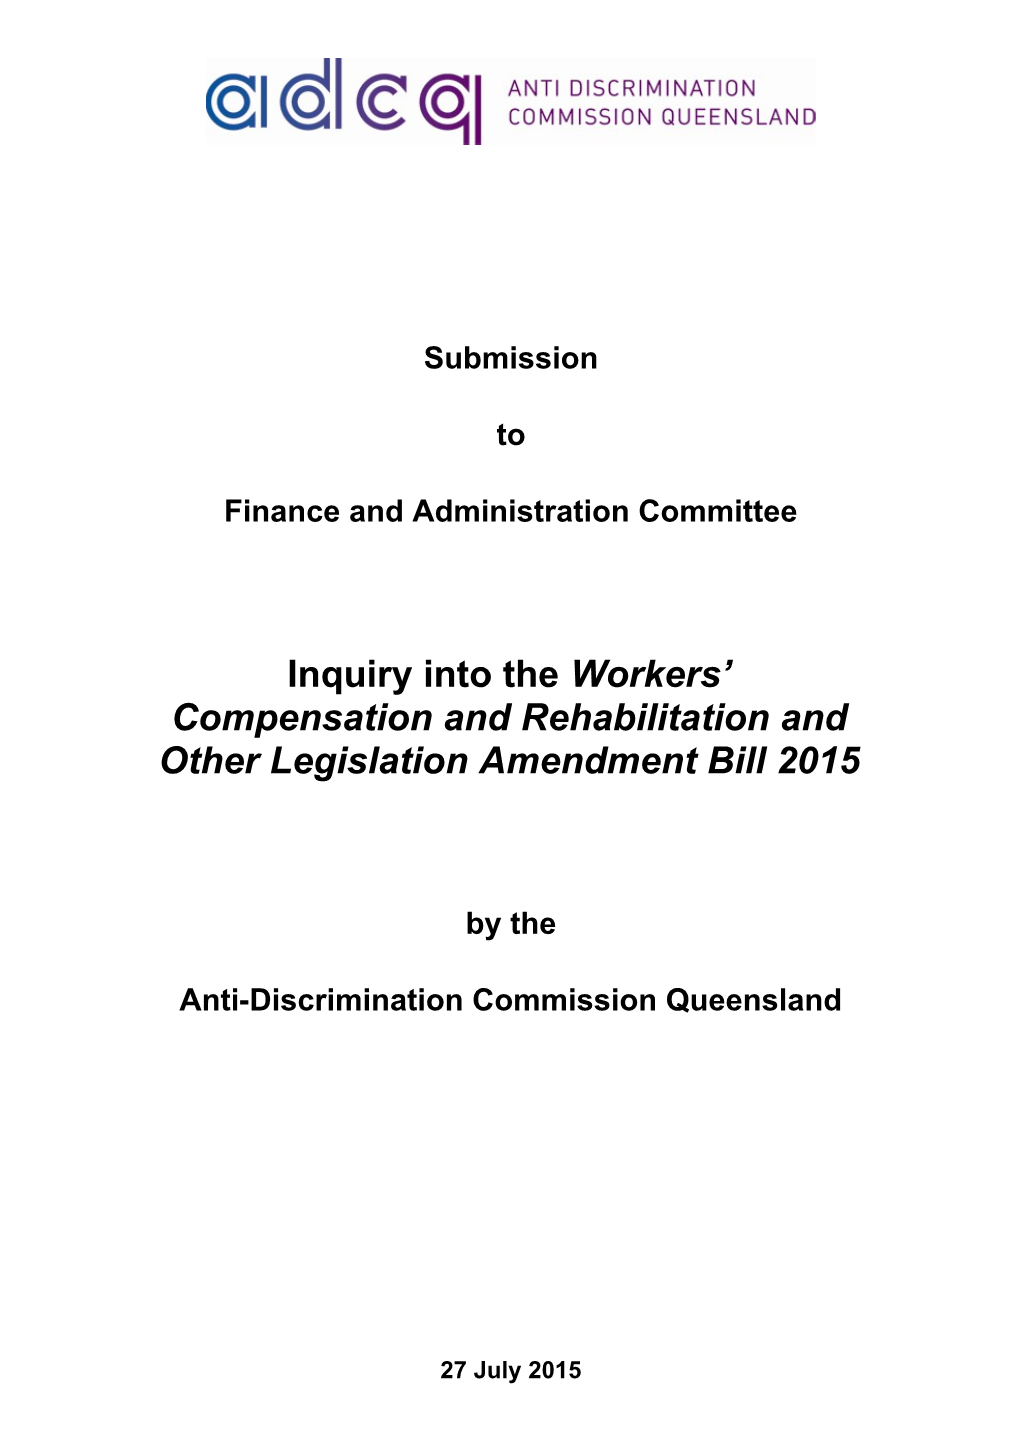 Inquiry Into the Justice and Other Legislation Amendment Bill 2014